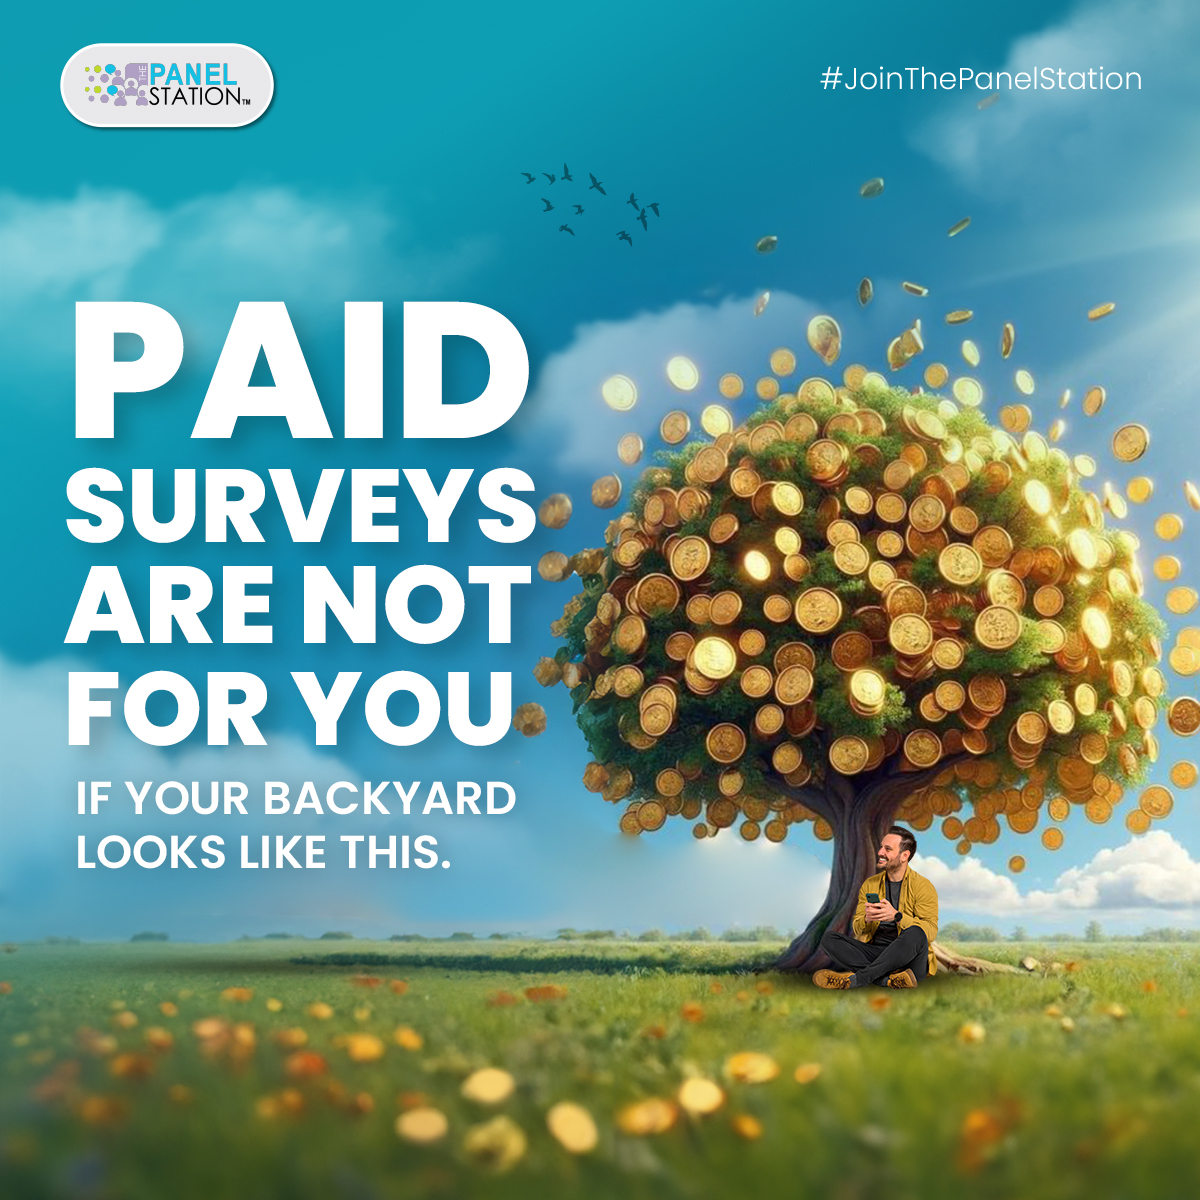 We get it! Money doesn't grow on trees. So, earning extra income by simply taking paid surveys on The Panel Station is a great idea!

Register now - Link in bio!

#thepanelstation #tps #paidsurveys #onlinesurveys #surveysformoney #earnmoneythroughsurvey